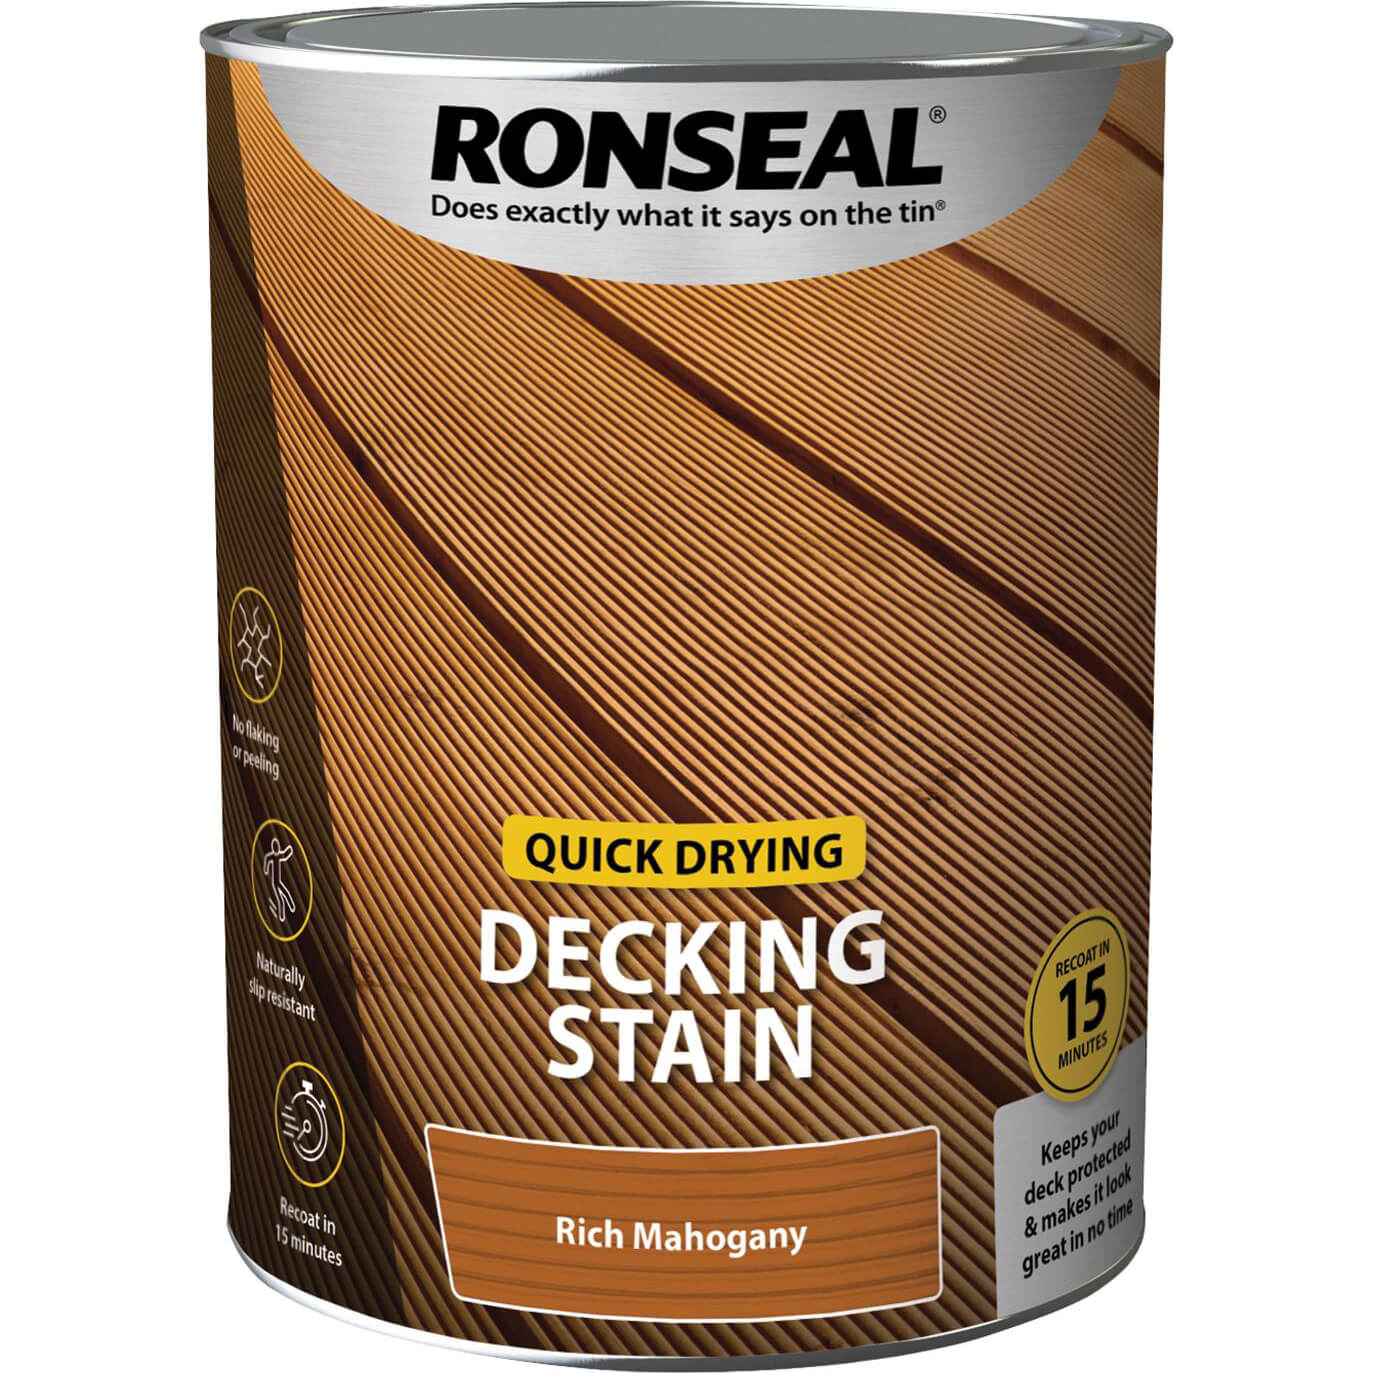 Image of Ronseal Quick Drying Decking Stain 5l Rich Mahogany